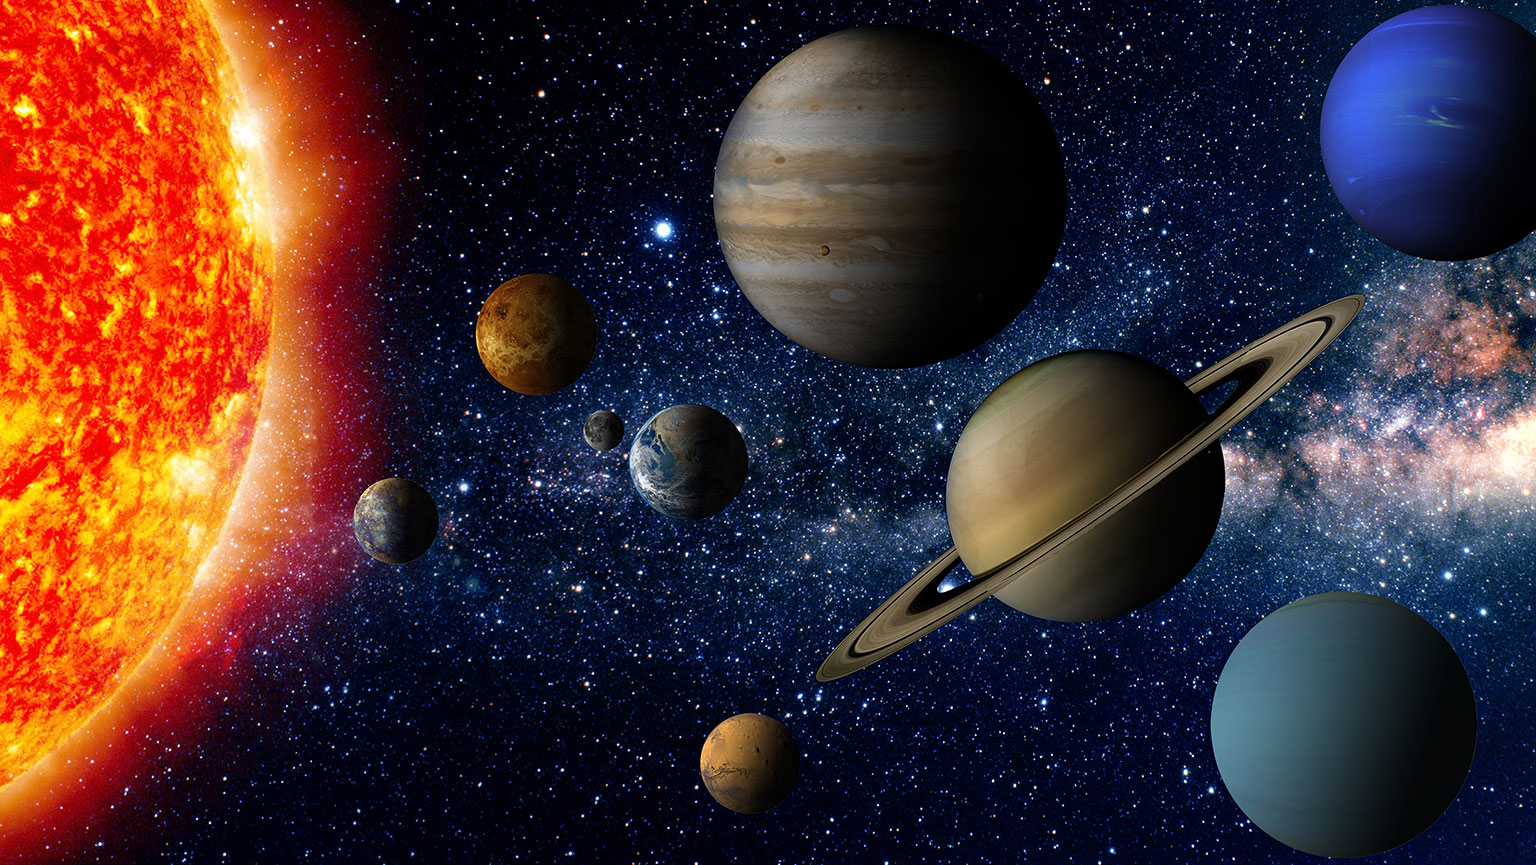 You’ve Got 15 Questions to Prove You Have a Ton of General Knowledge Solar System